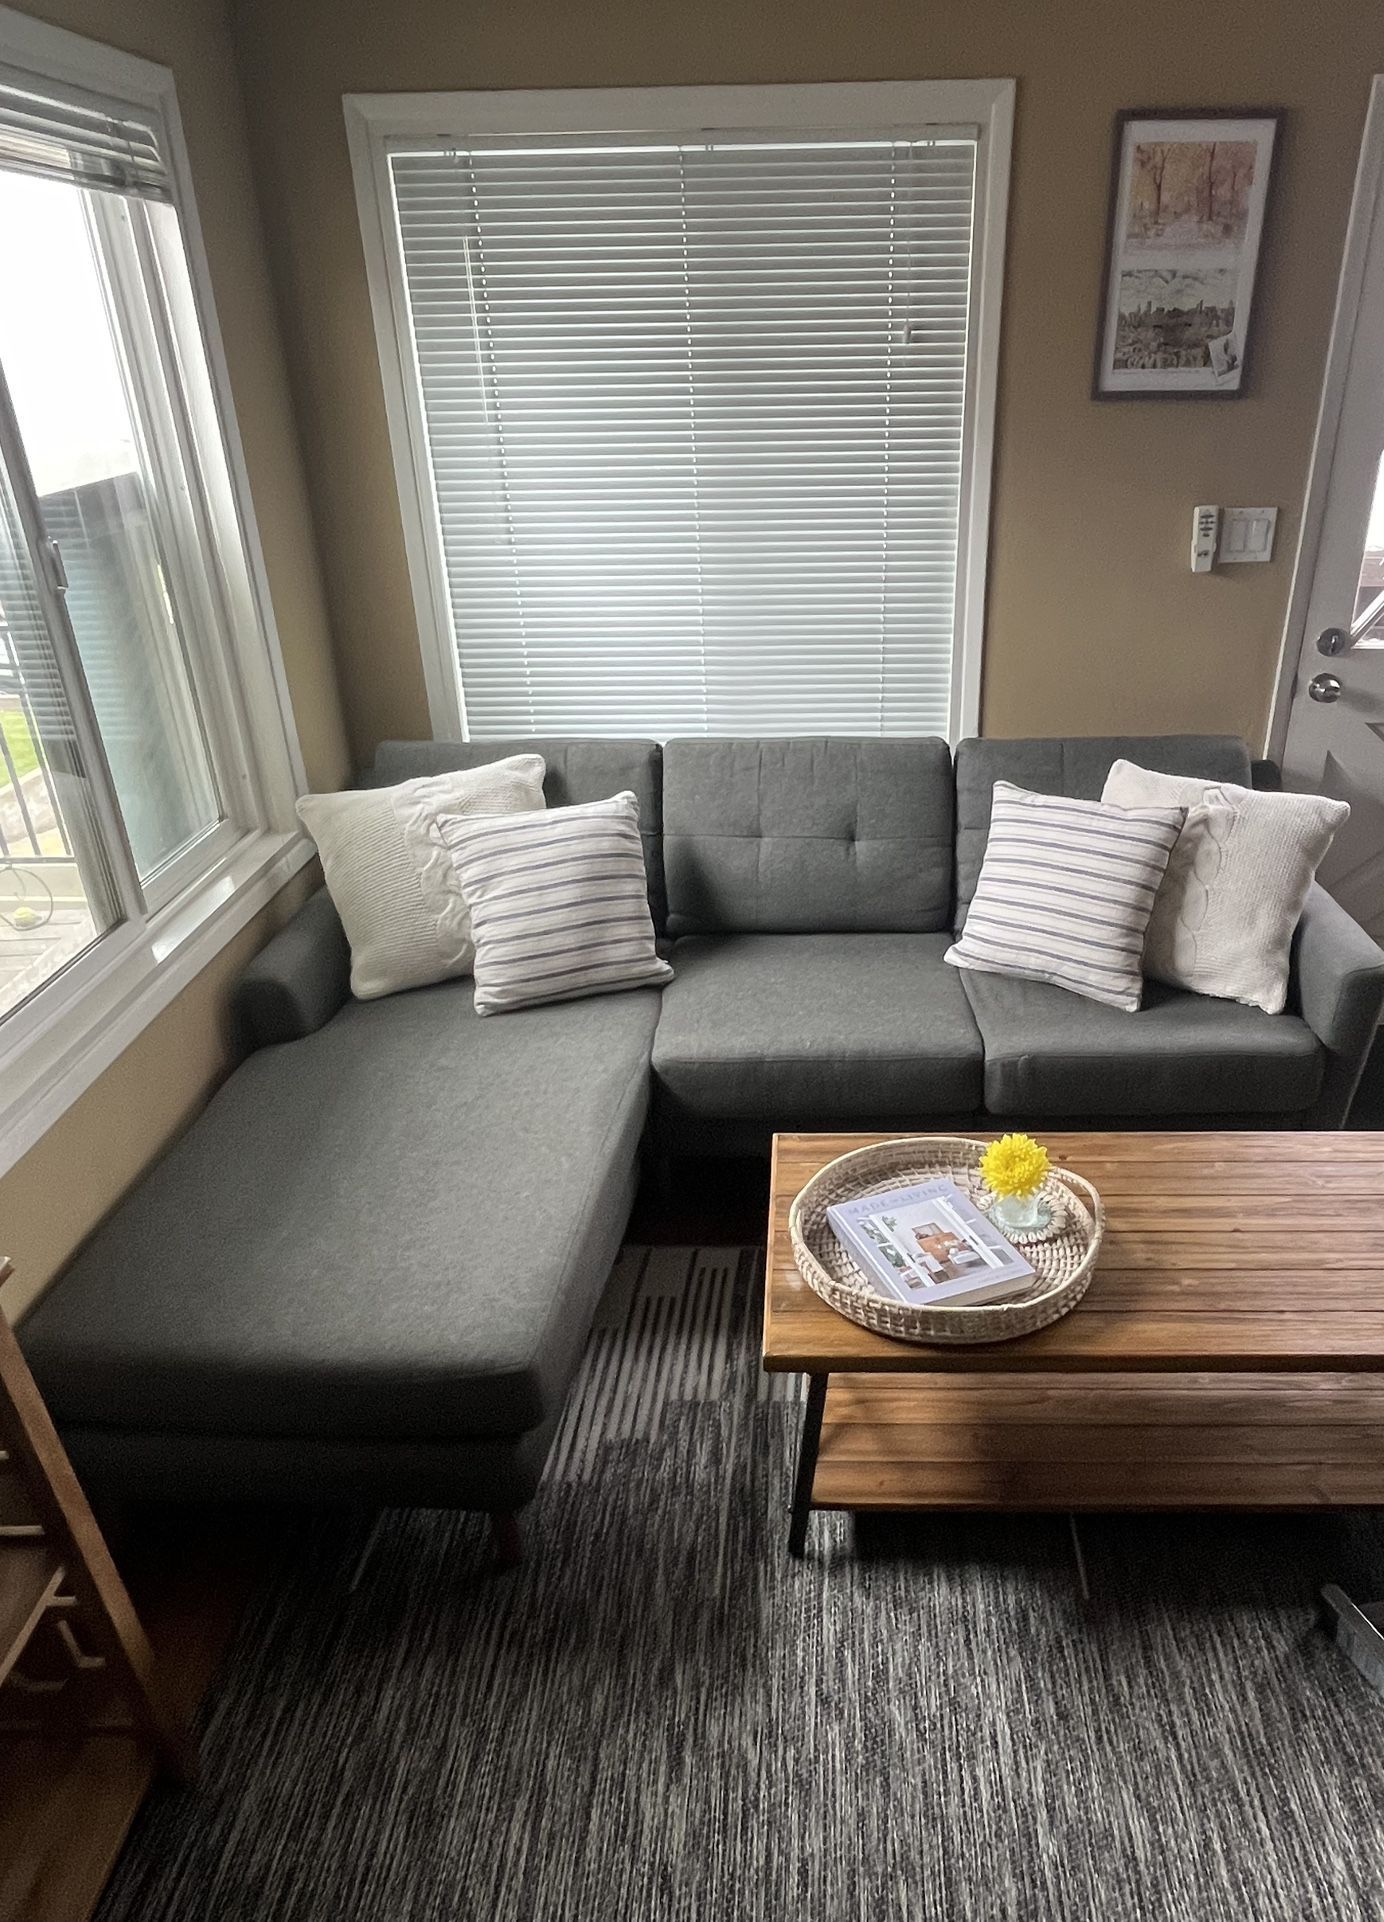 New Grey Burrow Sectional Couch - Beautiful Condition 